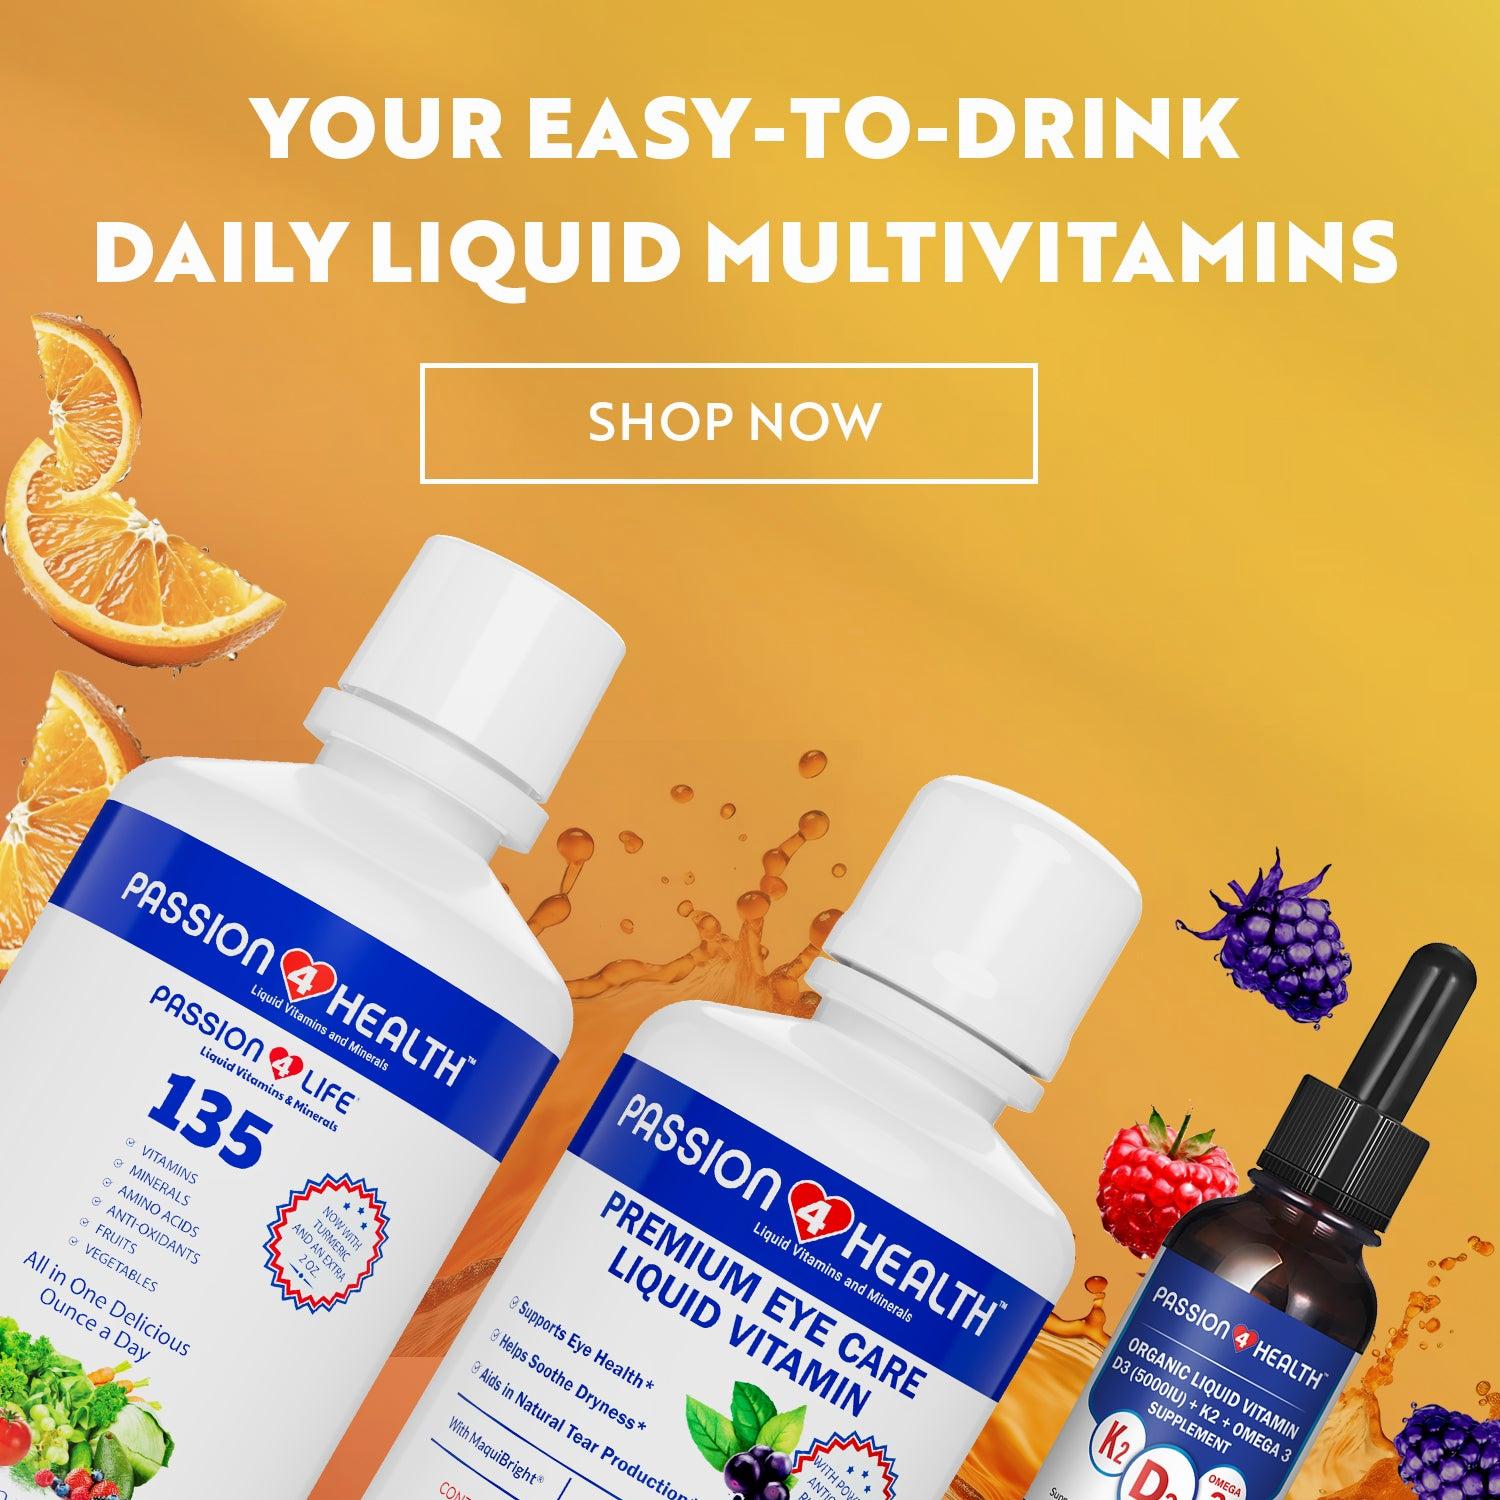 A range of liquid multivitamins in various flavors, including one for eye care, one a general multivitamin, and one containing vitamin D3, K2, and Omega 3.